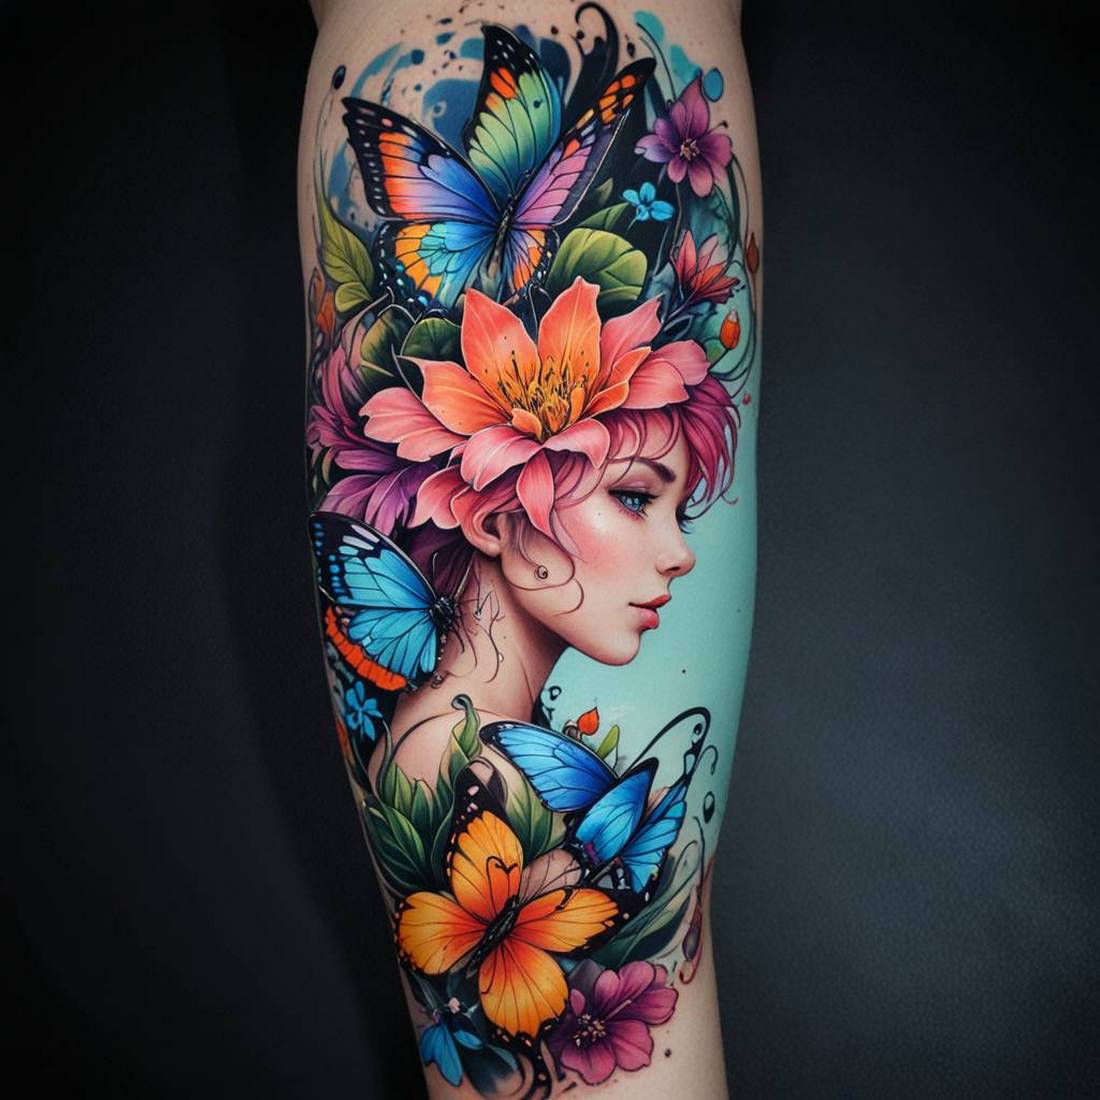 Tattoo Set #5 – Girl, Flowers, Butterflies (52 Sketch) cover image.